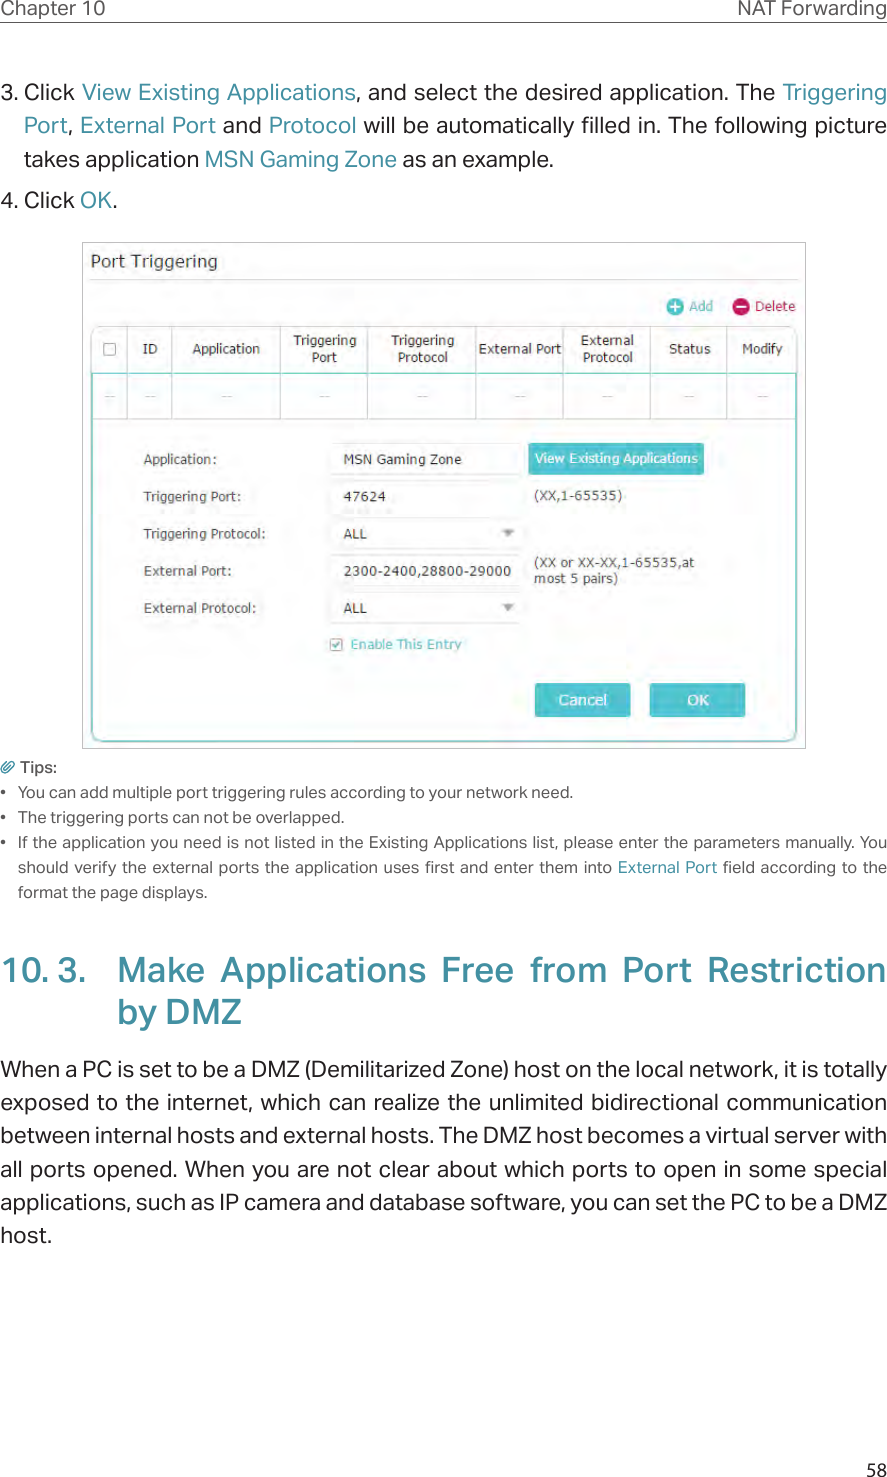 58Chapter 10 NAT Forwarding3. Click View Existing Applications, and select the desired application. The Triggering Port, External Port and Protocol will be automatically filled in. The following picture takes application MSN Gaming Zone as an example.4. Click OK.Tips:•  You can add multiple port triggering rules according to your network need.•  The triggering ports can not be overlapped.•  If the application you need is not listed in the Existing Applications list, please enter the parameters manually. You should verify the external ports the application uses first and enter them into External Port field according to the format the page displays.10. 3.  Make Applications Free from Port Restriction by DMZWhen a PC is set to be a DMZ (Demilitarized Zone) host on the local network, it is totally exposed to the internet, which can realize the unlimited bidirectional communication between internal hosts and external hosts. The DMZ host becomes a virtual server with all ports opened. When you are not clear about which ports to open in some special applications, such as IP camera and database software, you can set the PC to be a DMZ host.